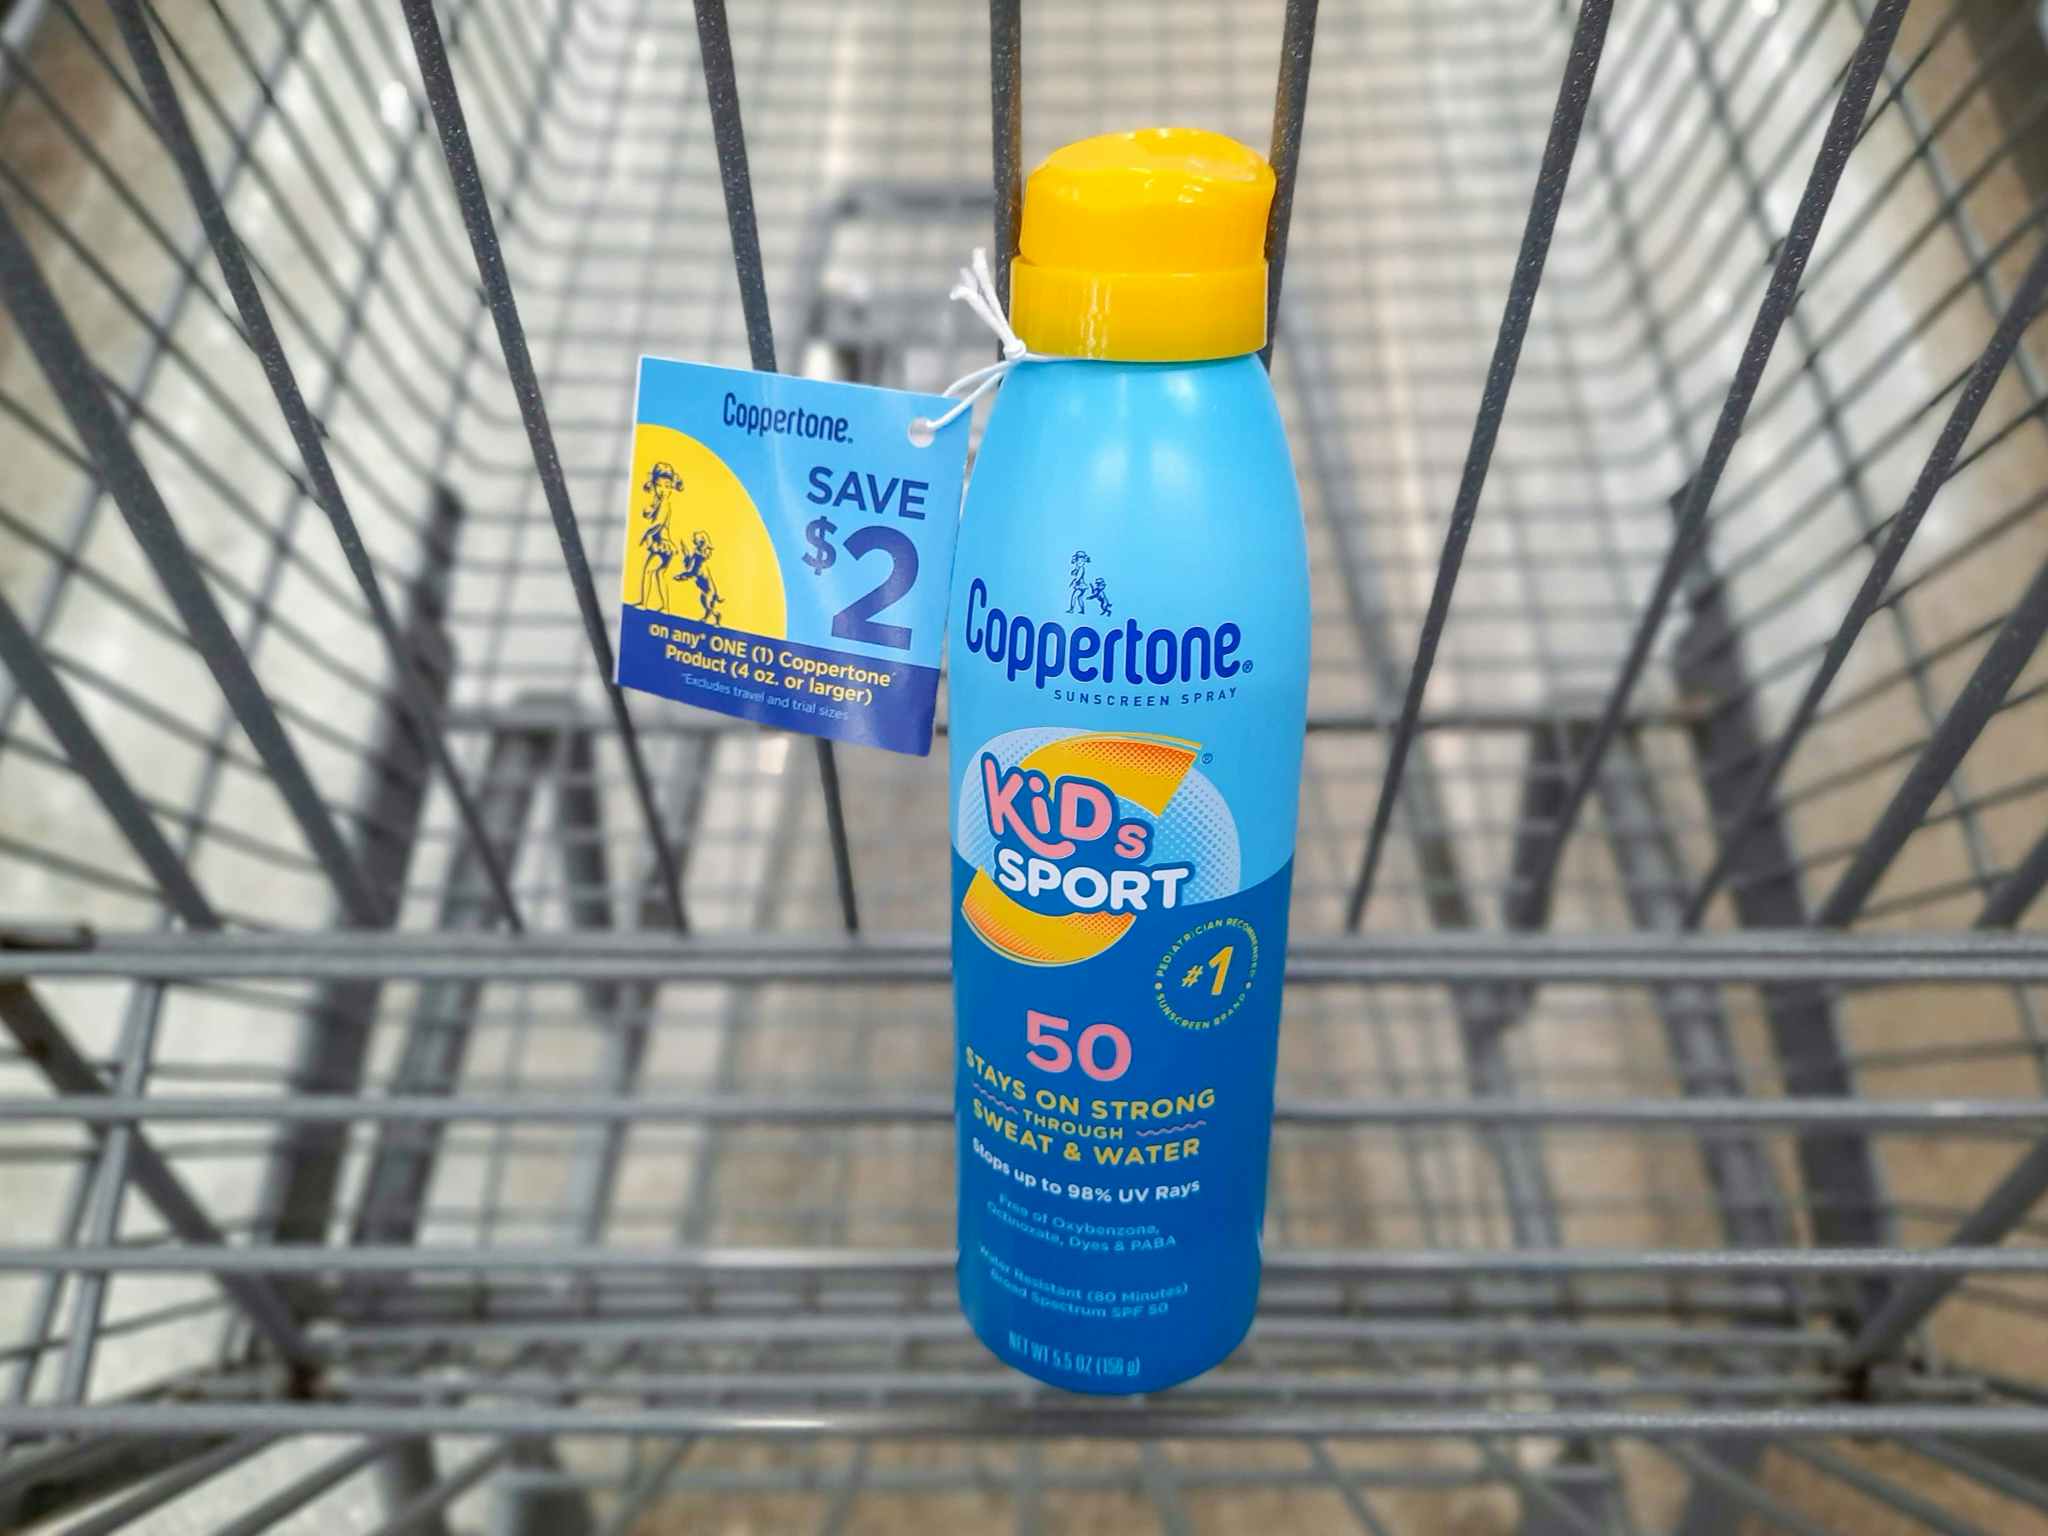 Coppertone Kids Sport Sunscreen product in Walmart shopping cart. A $2 hangtag coupon is attached to the product.